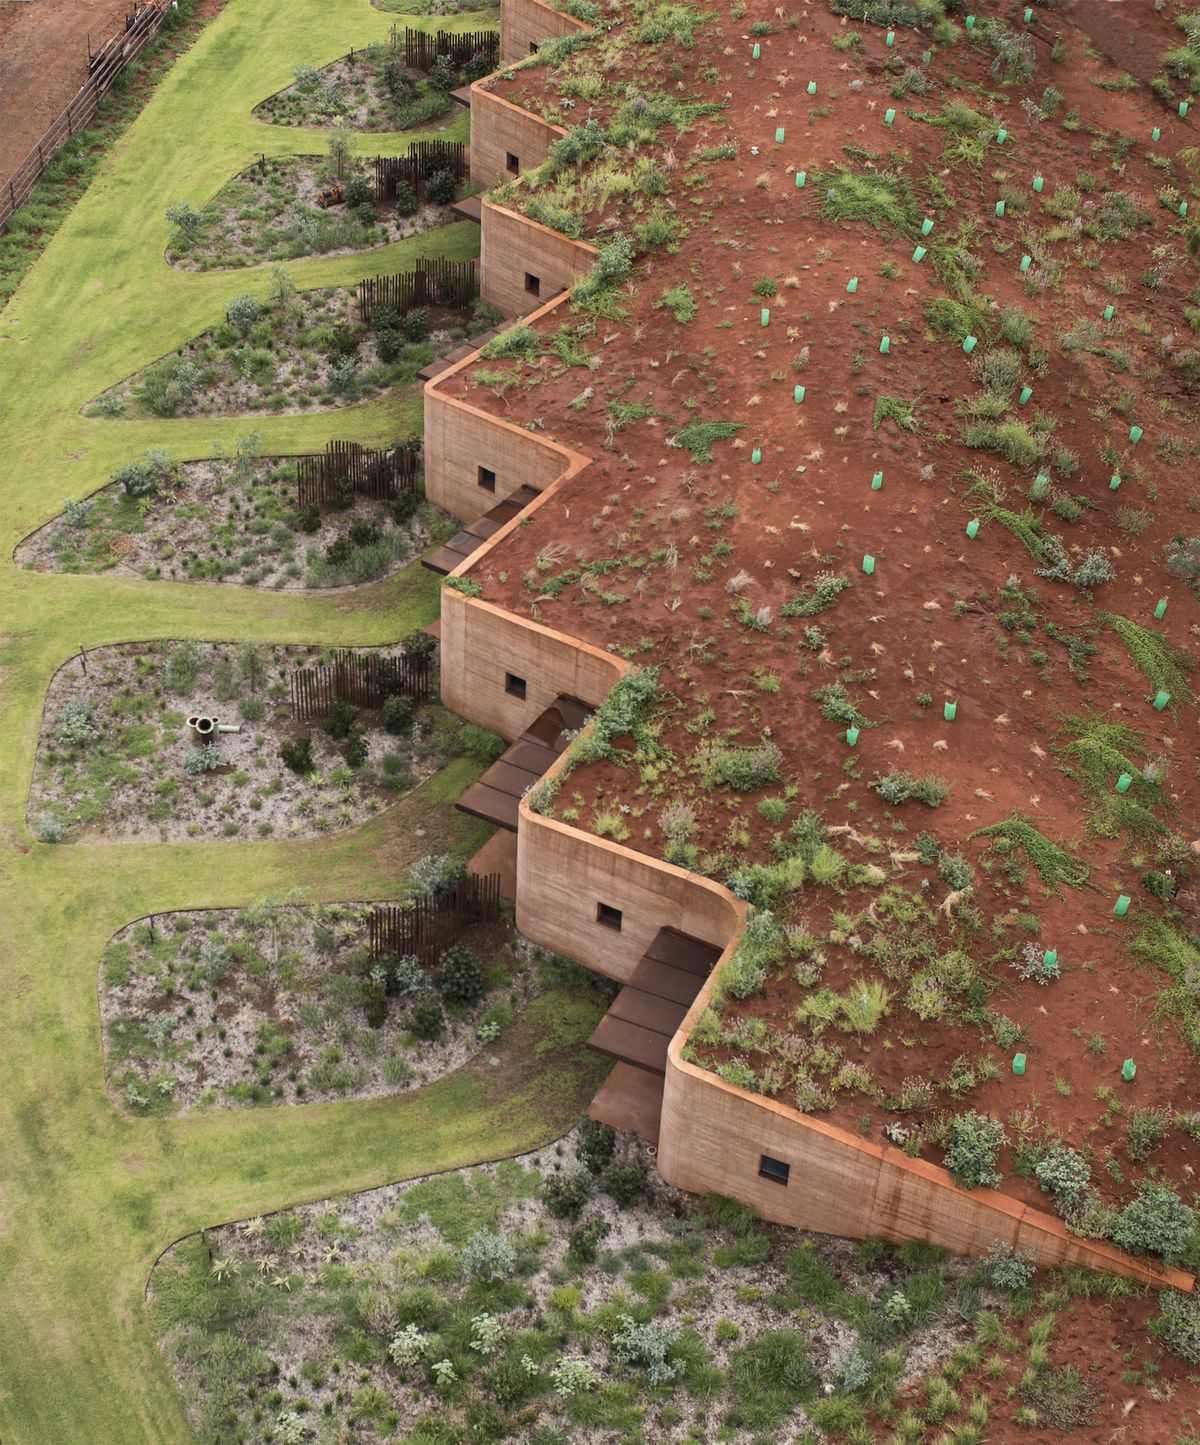 A zig-zagging wall made of red earth that’s built into a hillside.